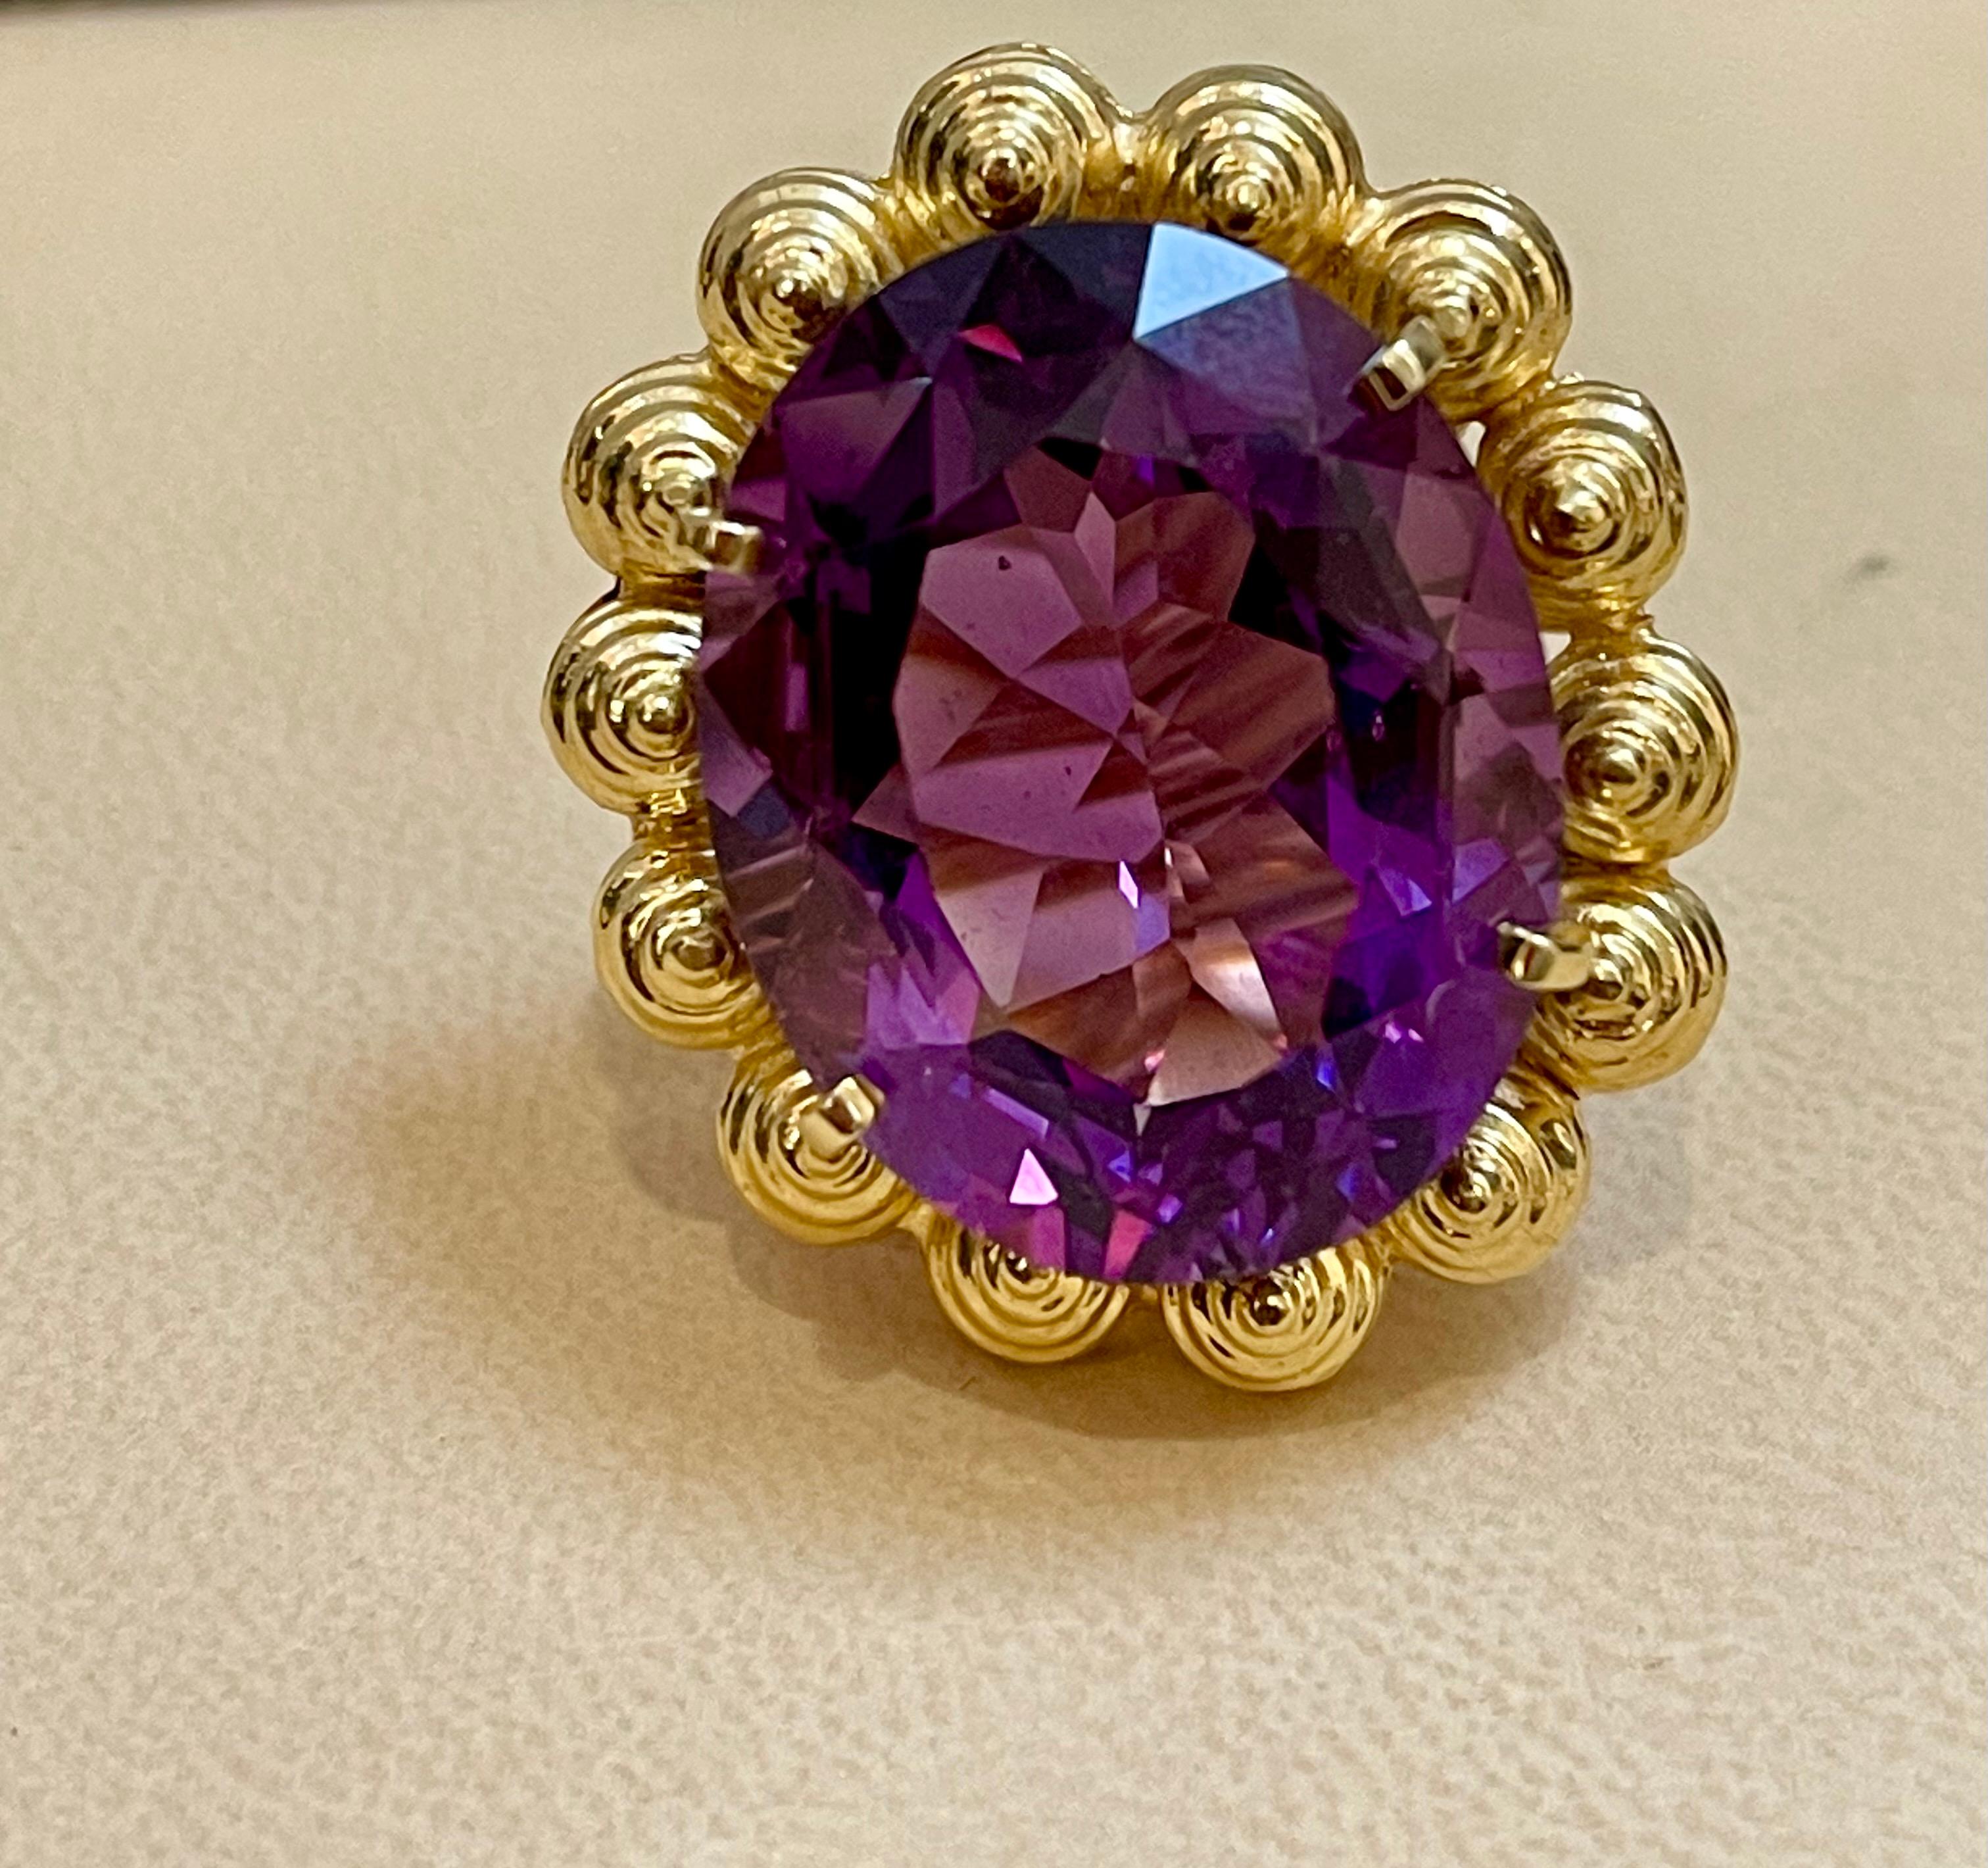 Approximately 50 Carat  Amethyst Cocktail Ring in solid 18 Karat Yellow Gold  29 Grams Size 5
This is a Beautiful Cocktail ring ring which has a large approximately 50  carat of high quality Amethyst . Color and clarity is extremely nice. Large Oval